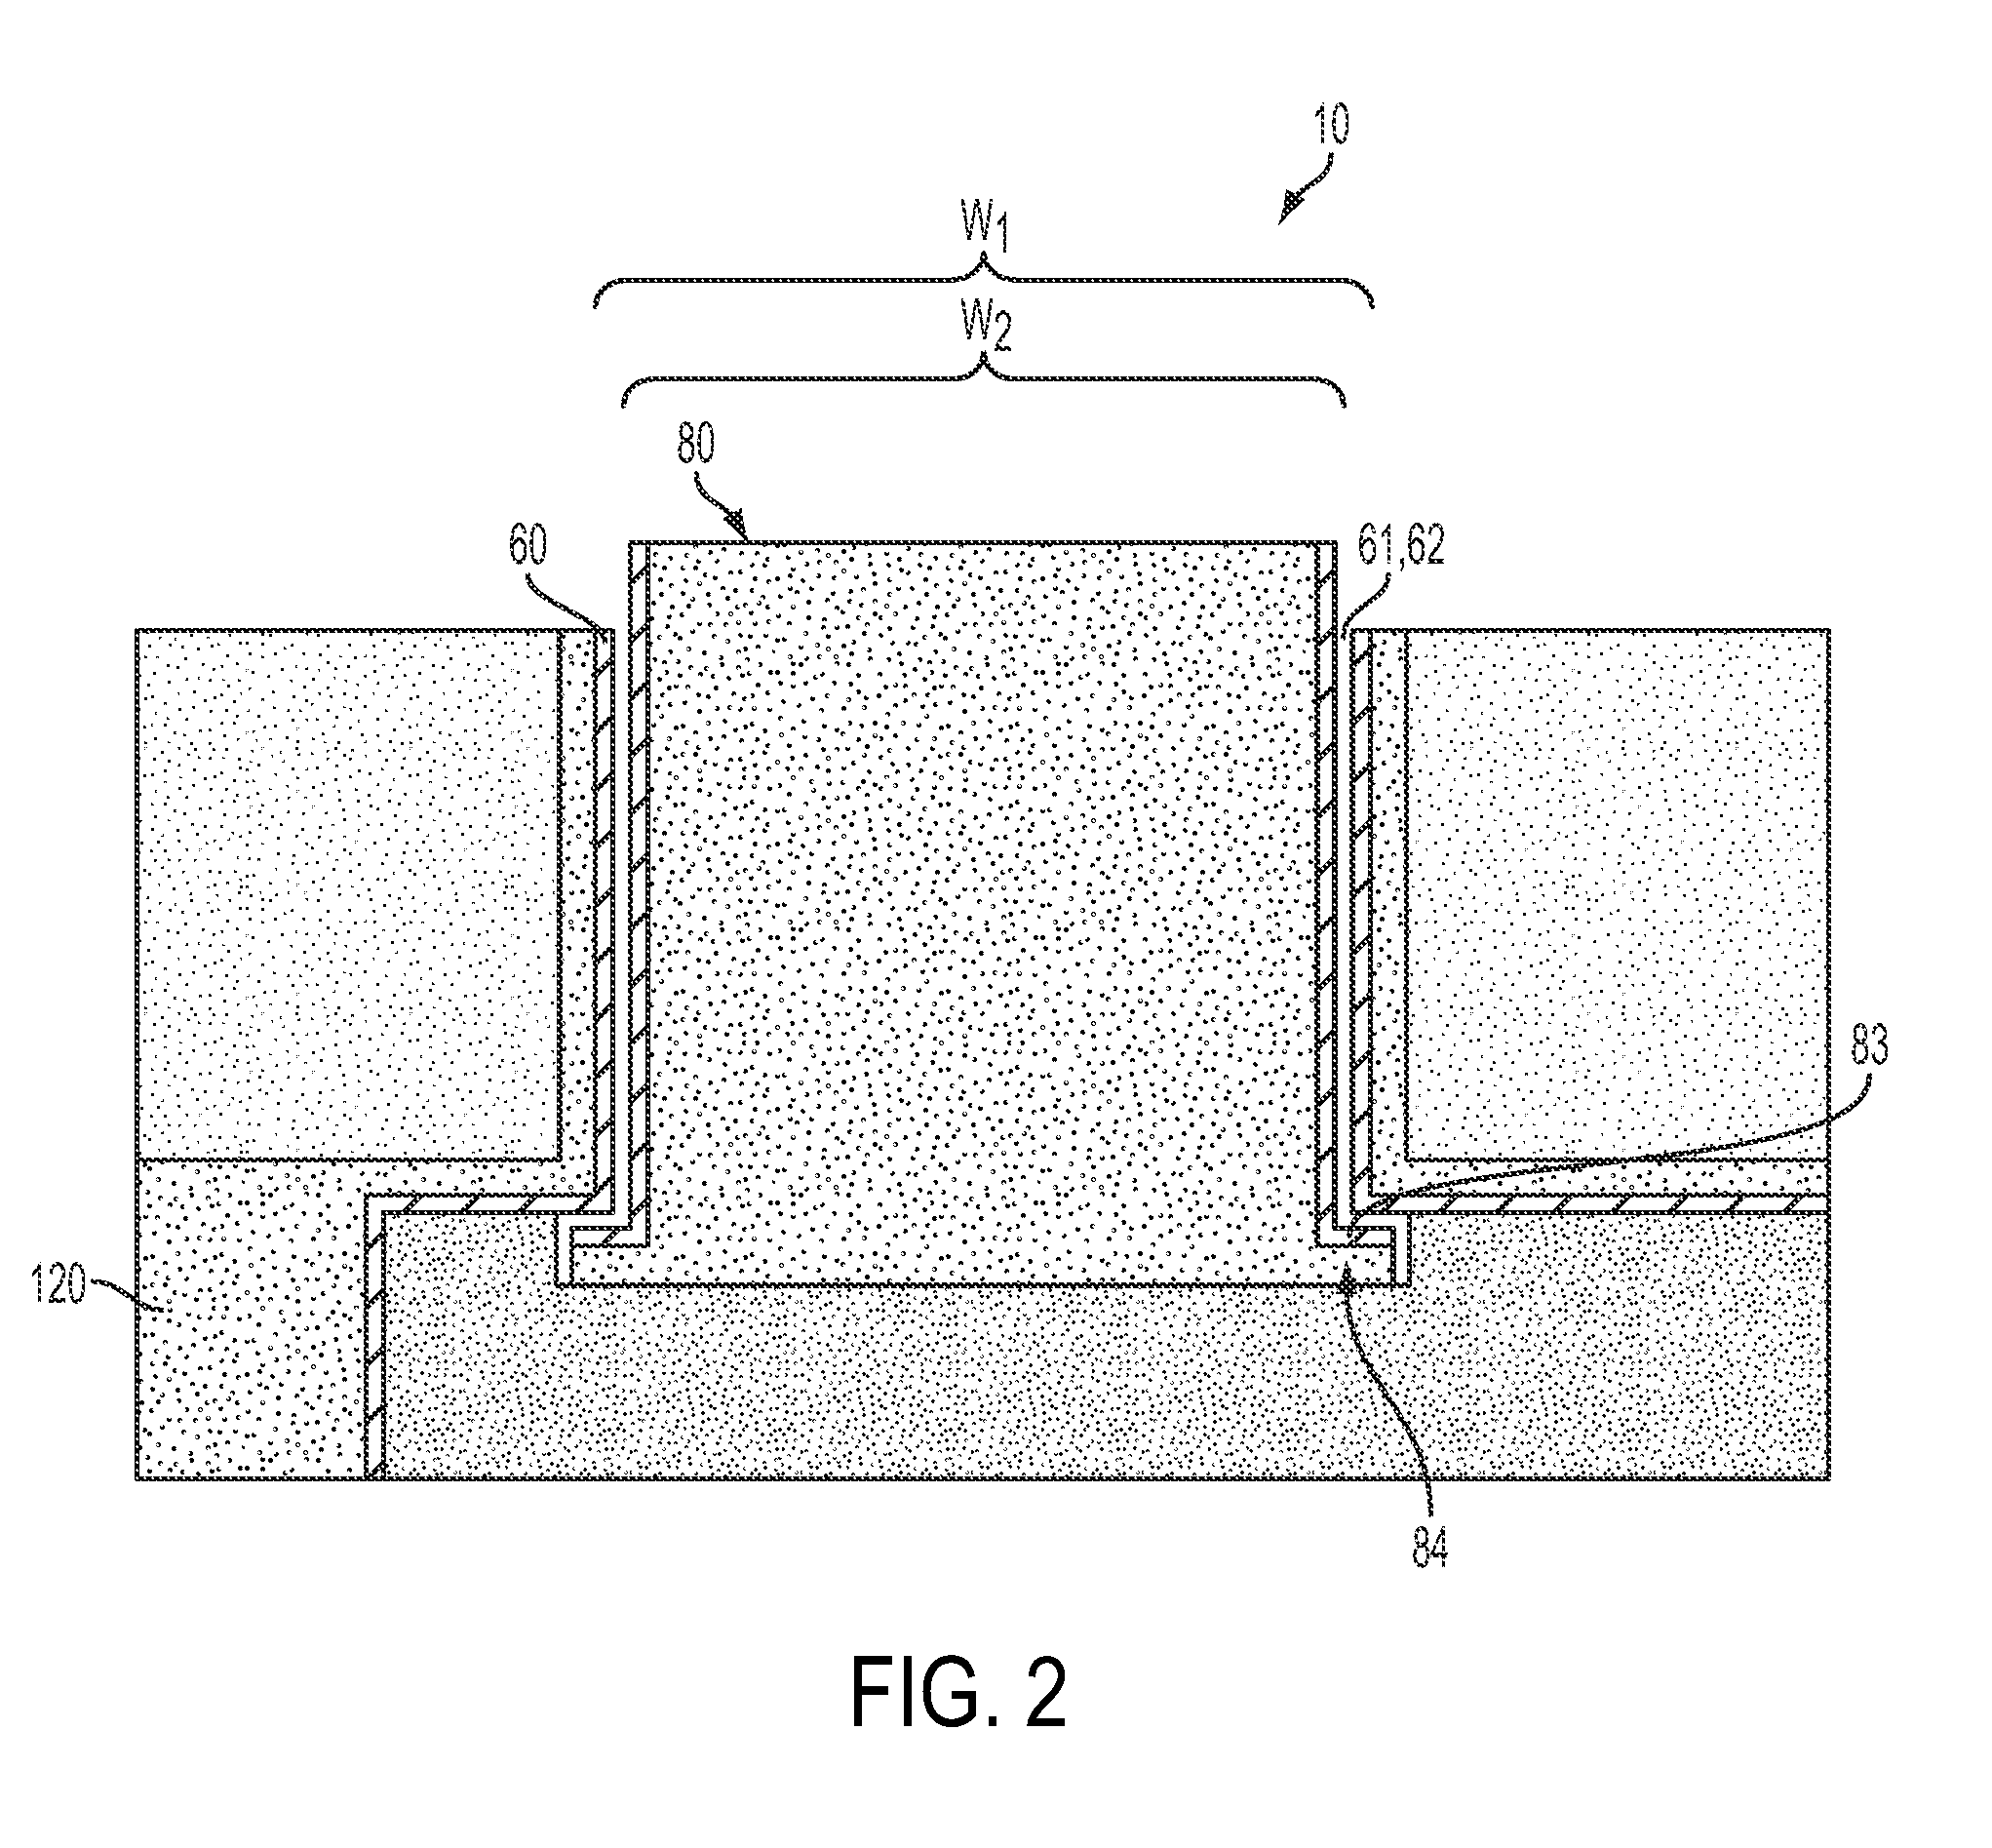 Probe apparatus assembly and method